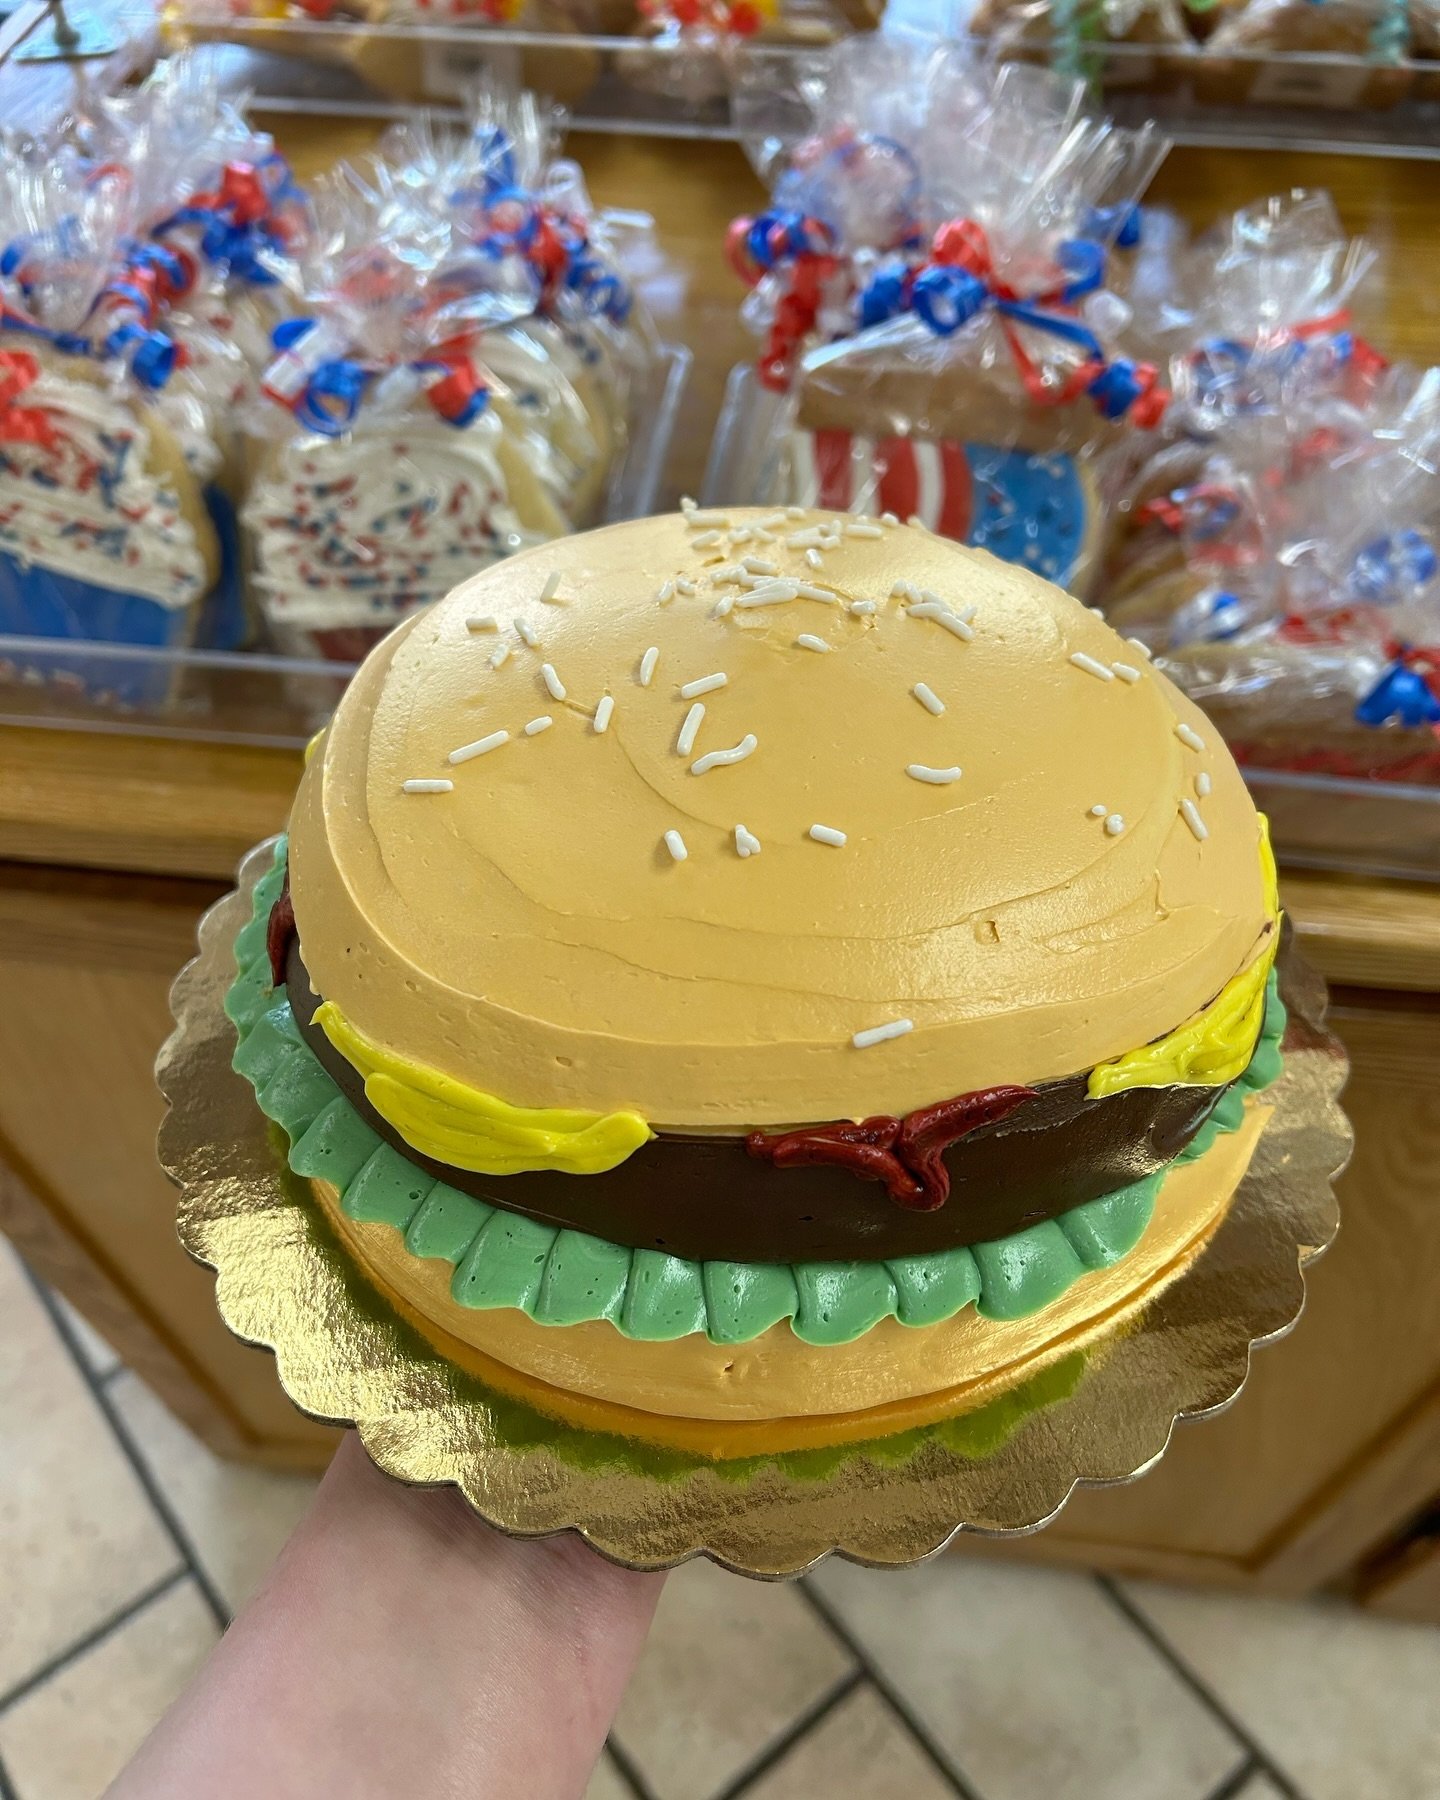 Burger cakes are back just in time for Memorial Day! 🍔🇺🇸